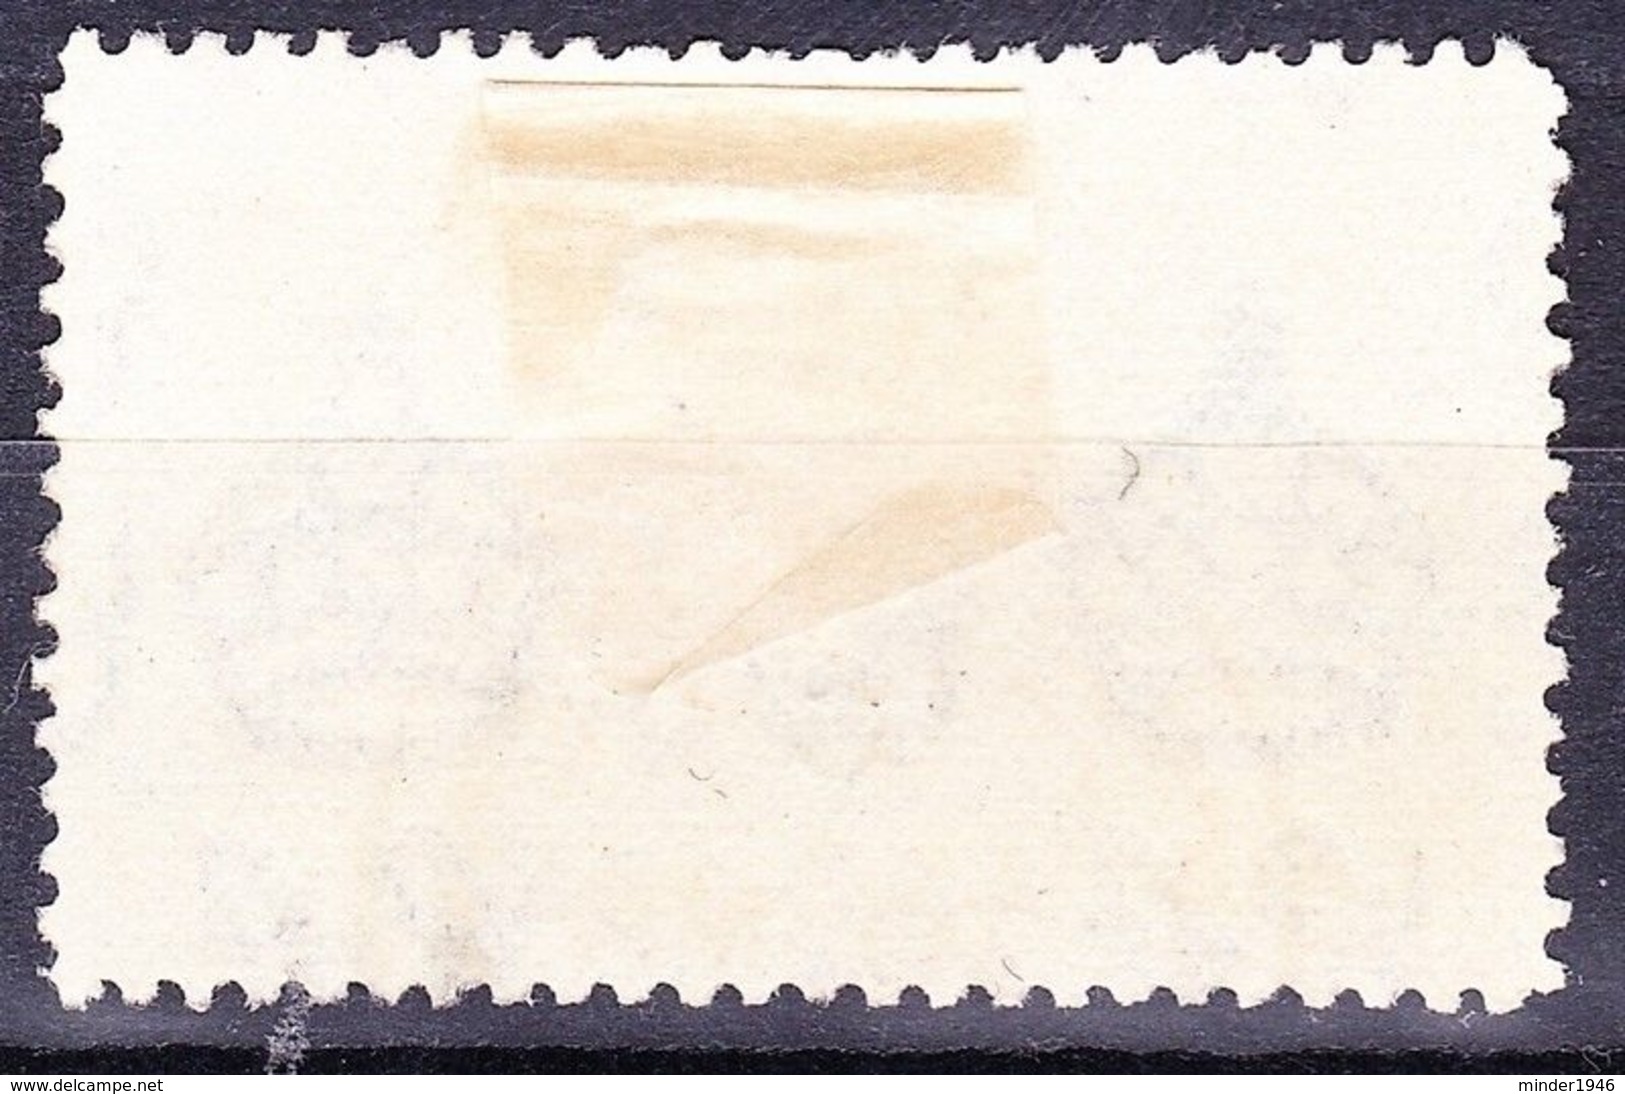 CANADA 1946 17c Ultramarine Special Delivery Stamp Air SGS17 MH - Unused Stamps